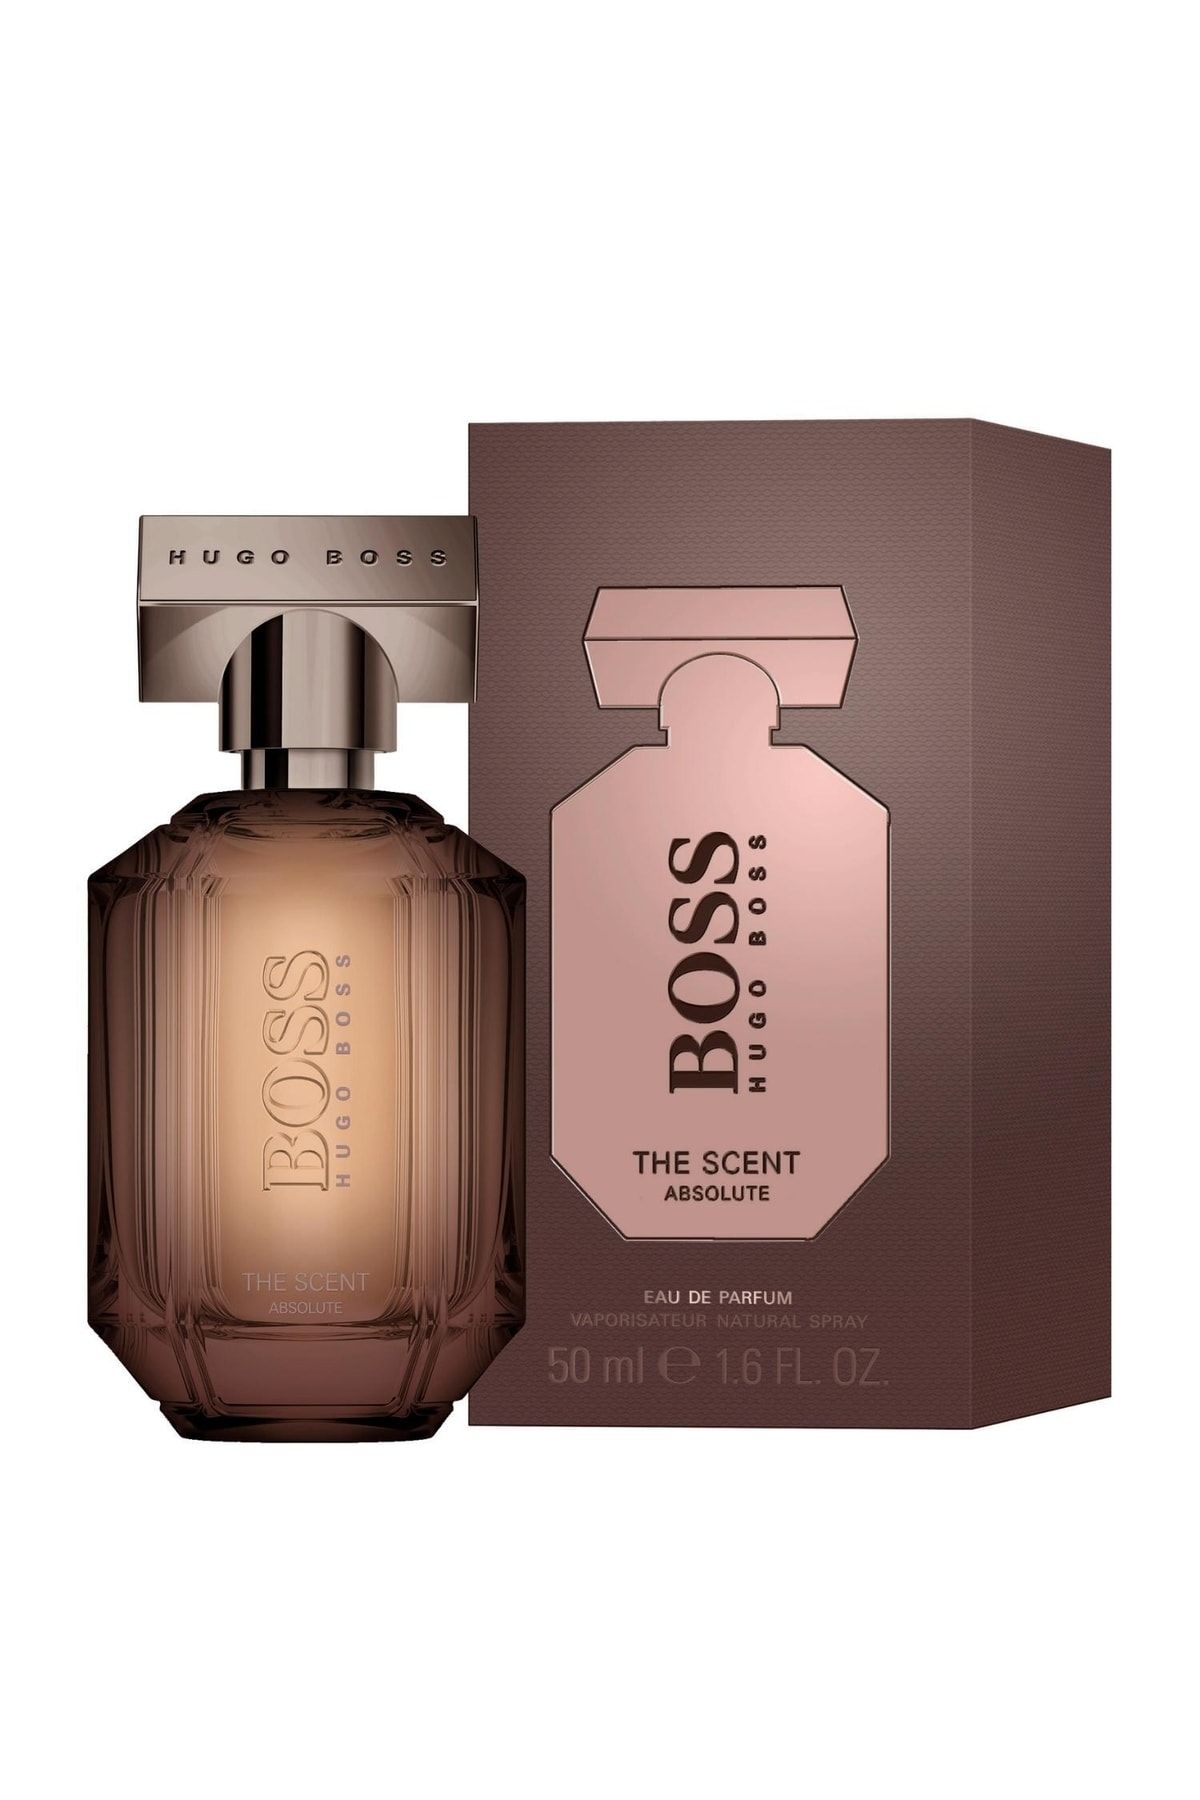 Boss for her парфюмерная вода. Boss the Scent for her Hugo Boss. Hugo Boss духи женские the Scent. Hugo Boss the Scent absolute for her. Hugo Boss the Scent for her 50 ml.